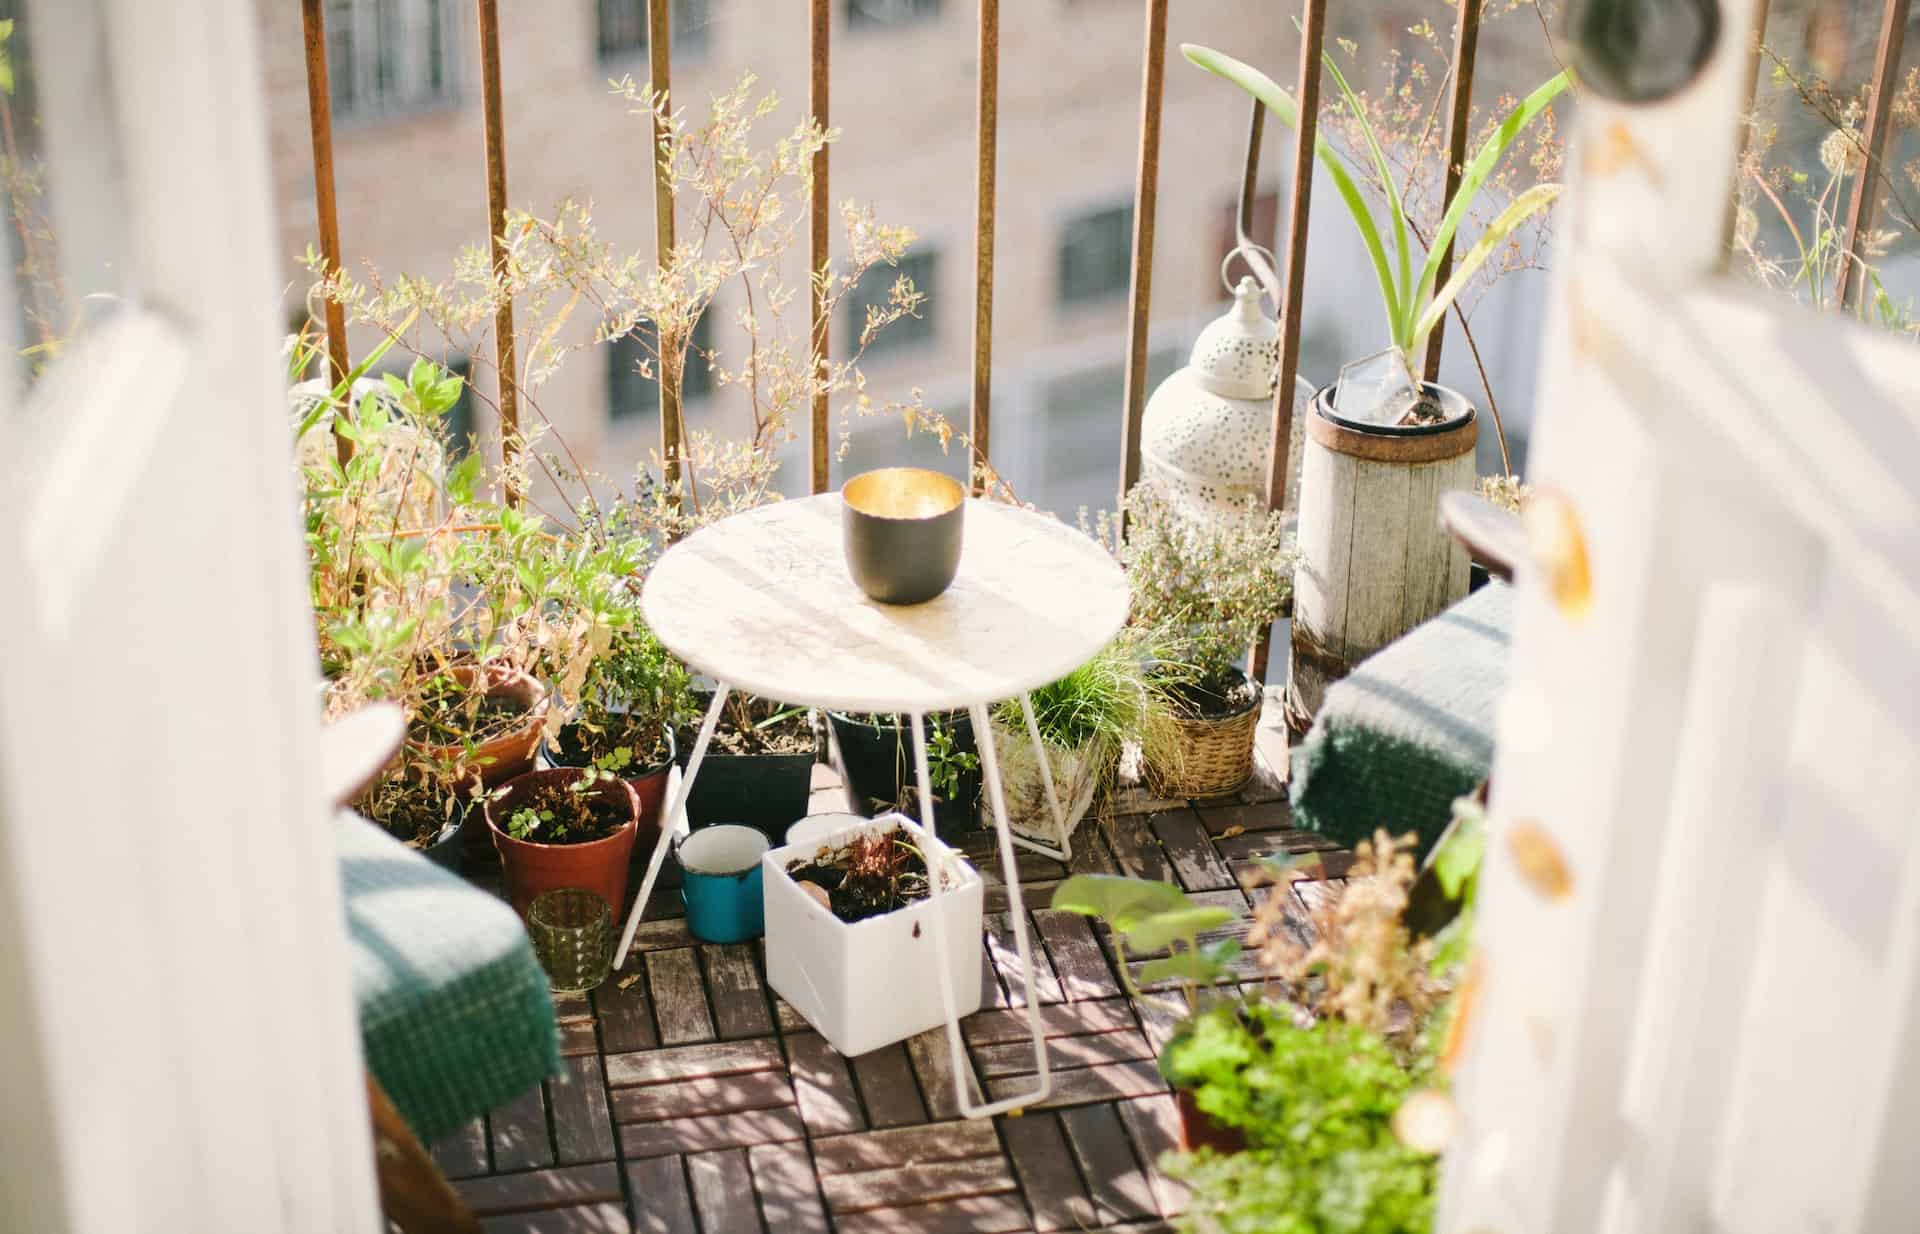 How to decorate your balcony for autumn? The best inspirations